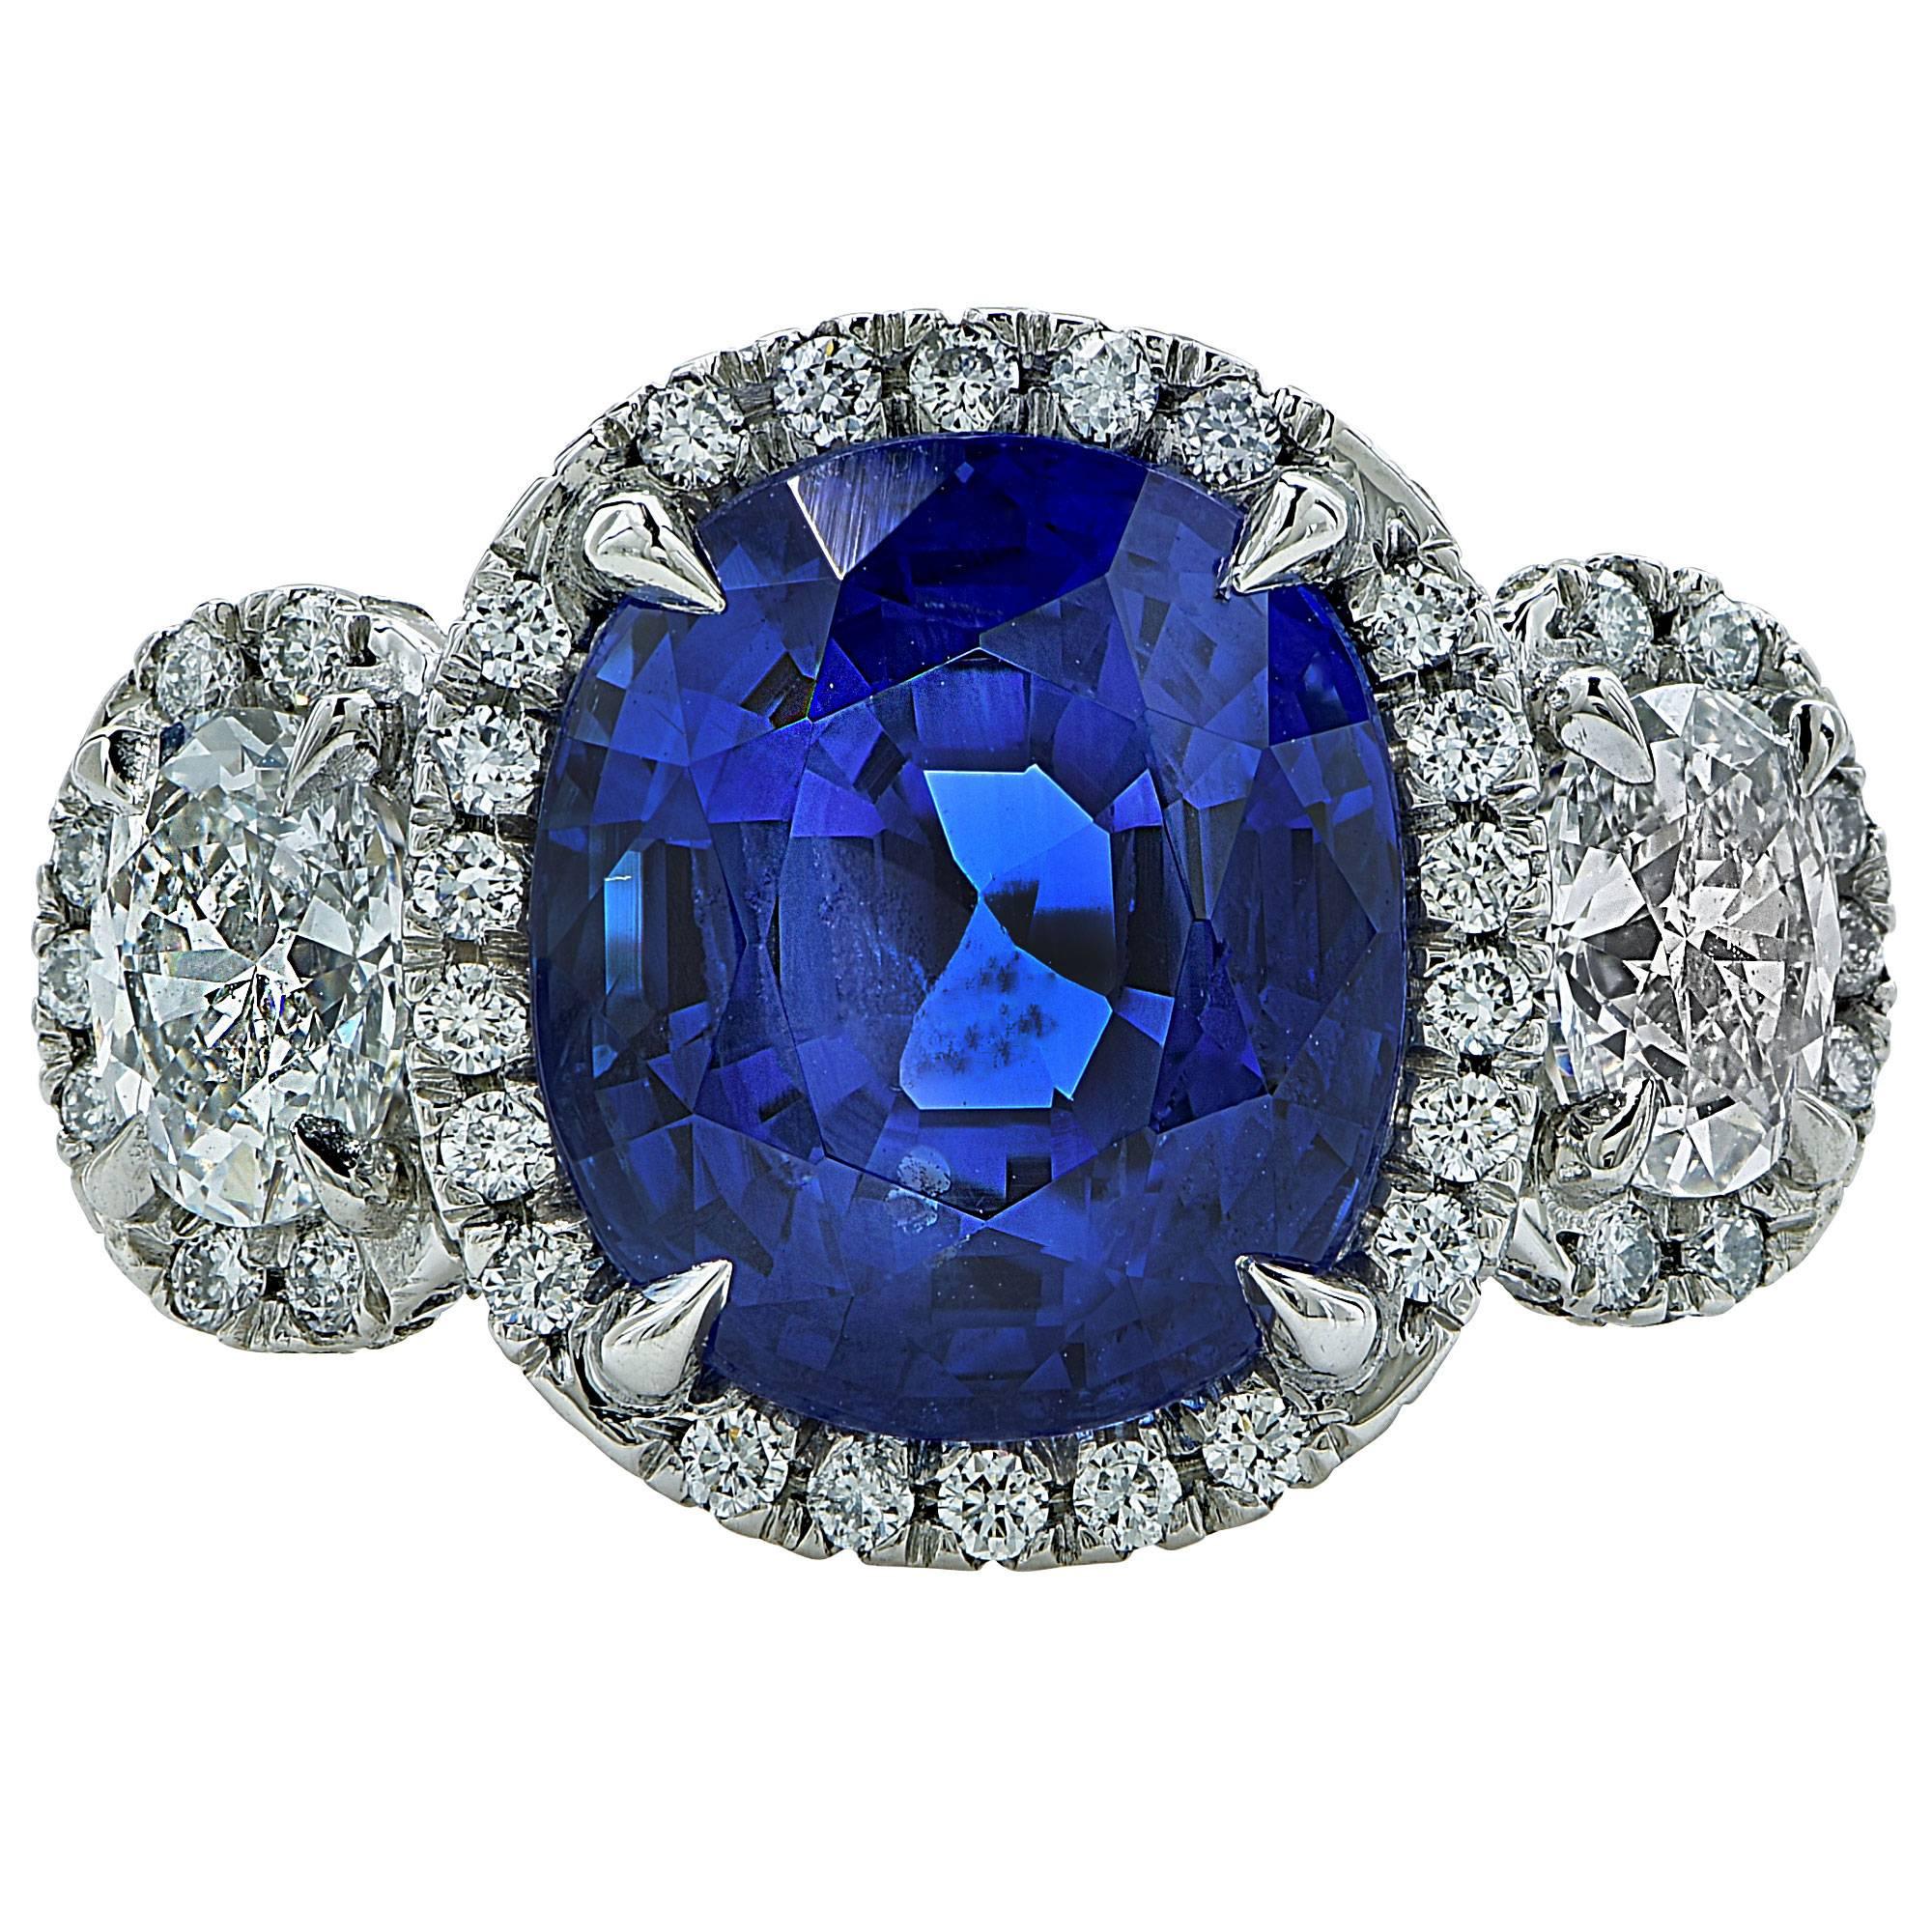 This Gorgeous Blue Ceylon Sapphire catches the eye with it's amazing vivid color. The 7.51 carat cushion cut sapphire has been certified by the AGL and comes with a certificate. The ring also features another 1.85 carat total weight of side diamonds